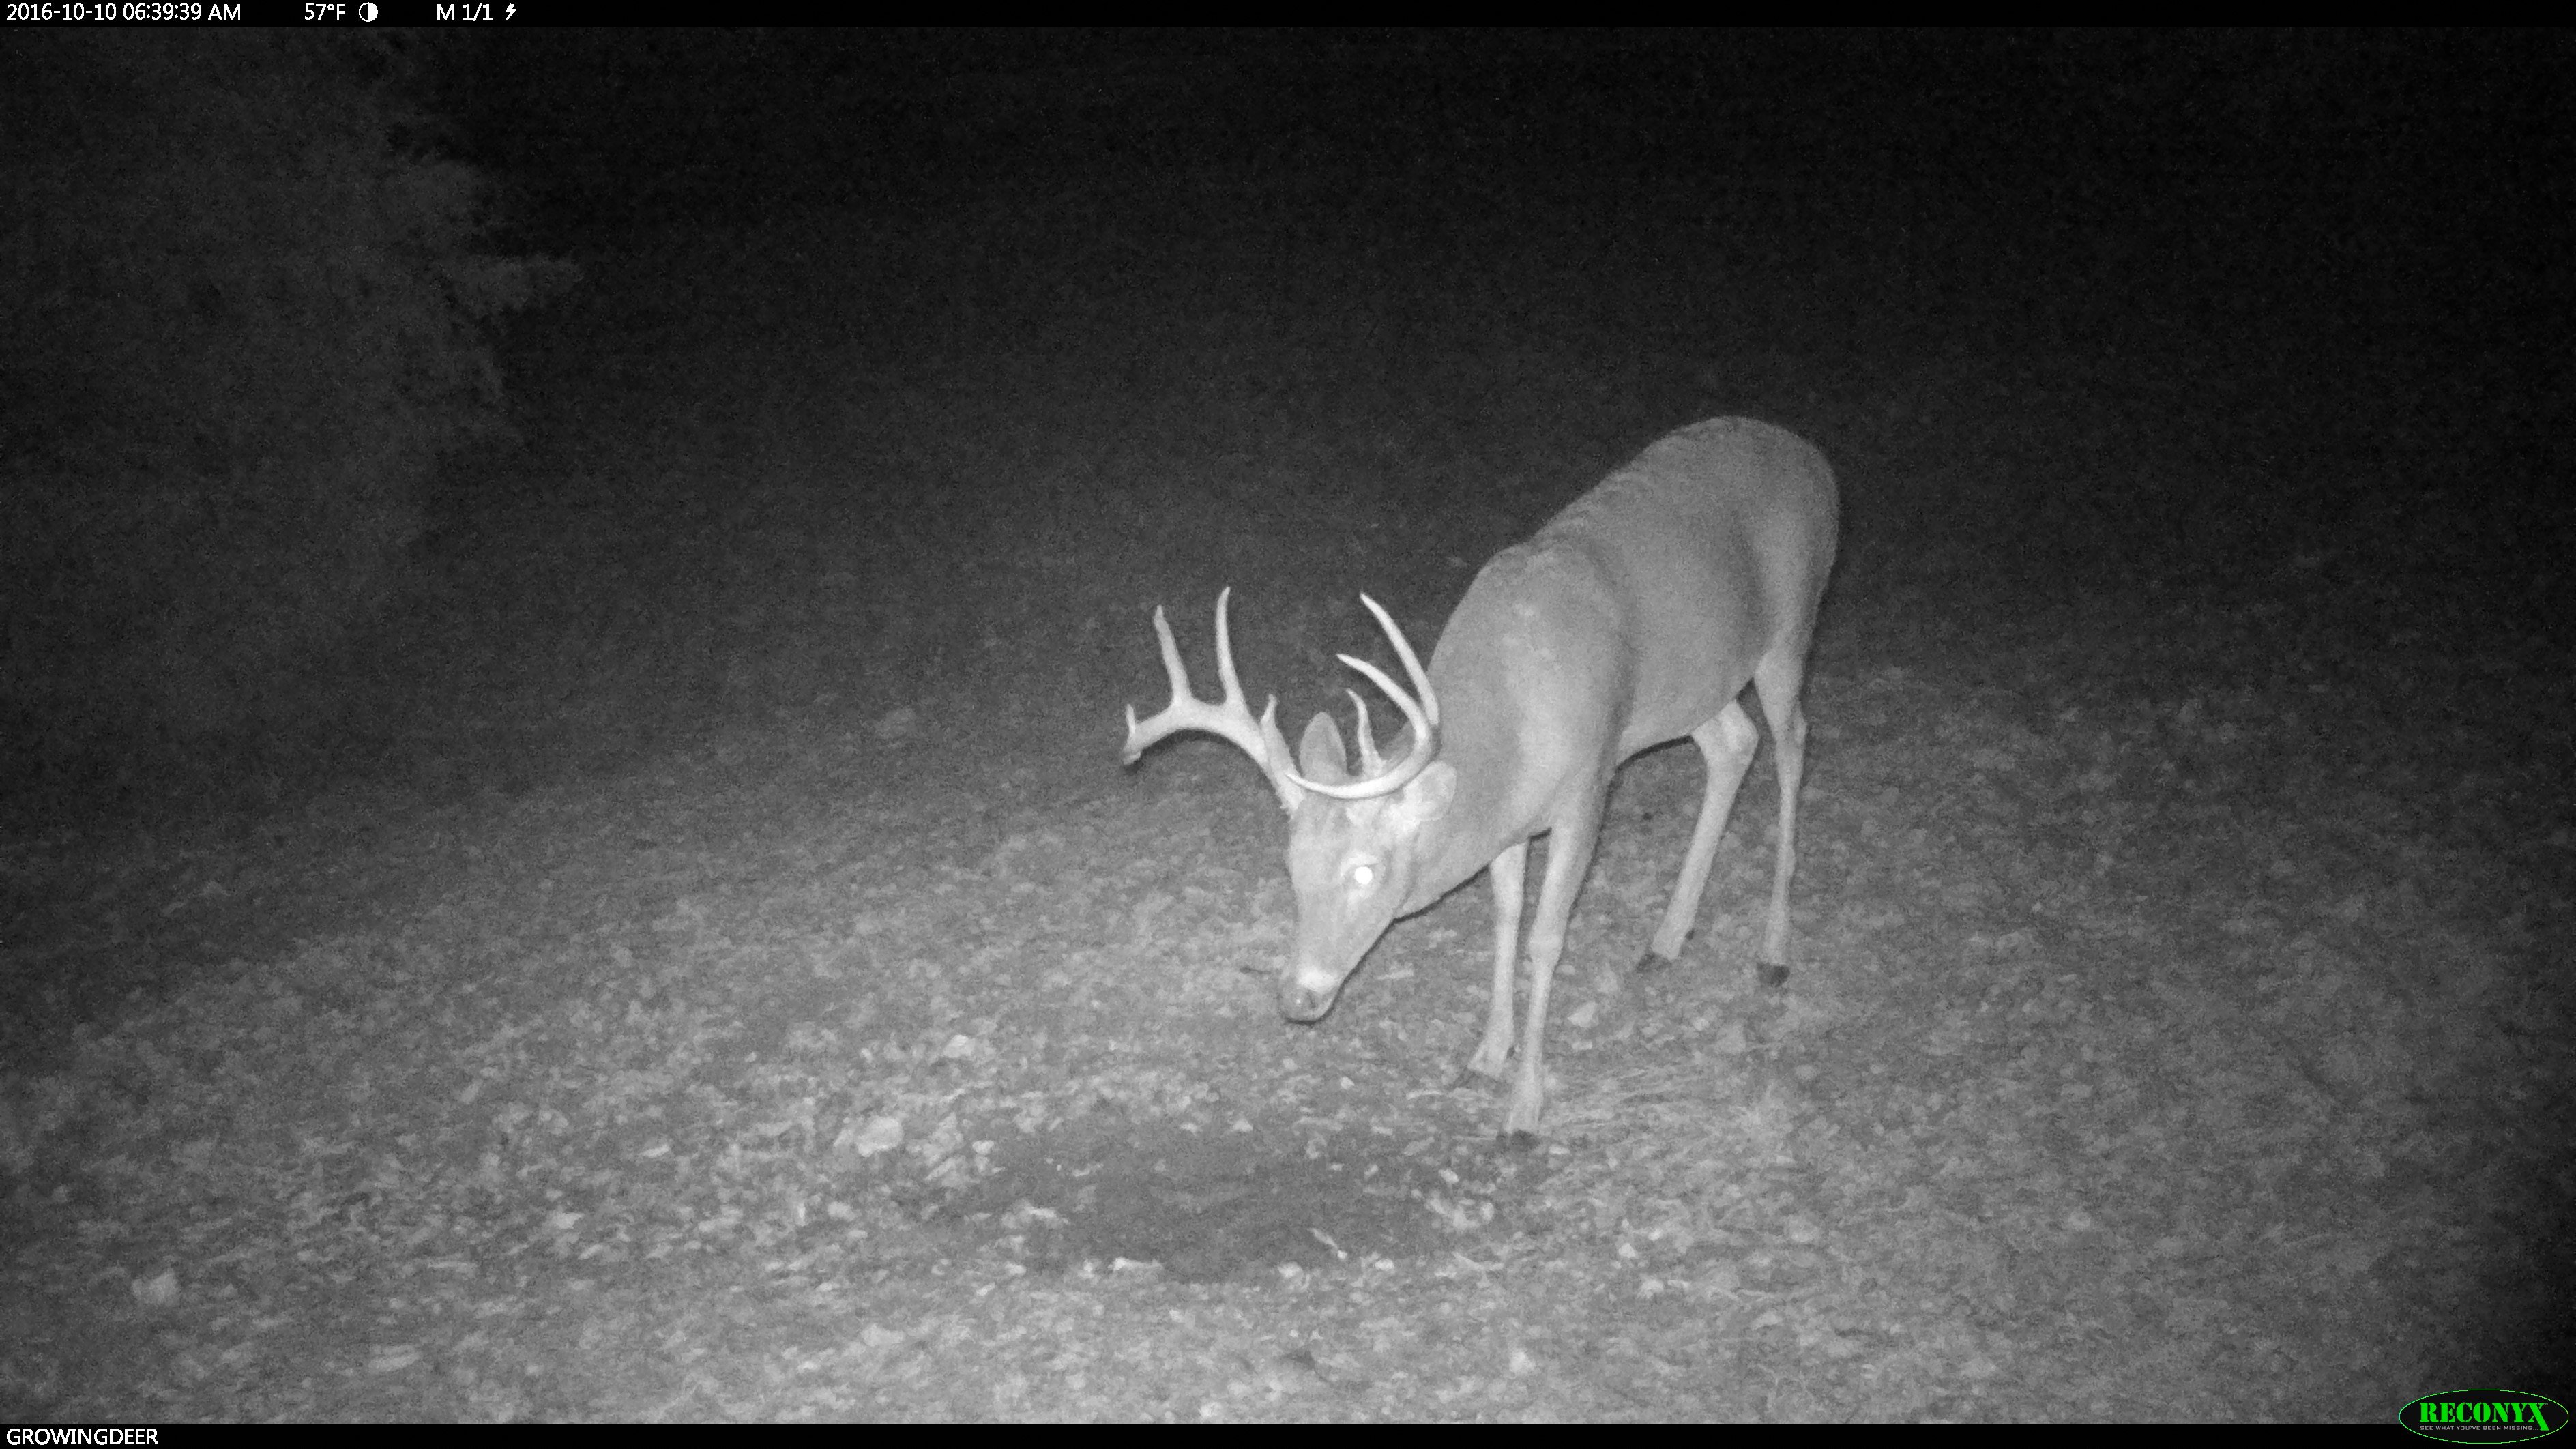 Headturner is a nocturnal buck